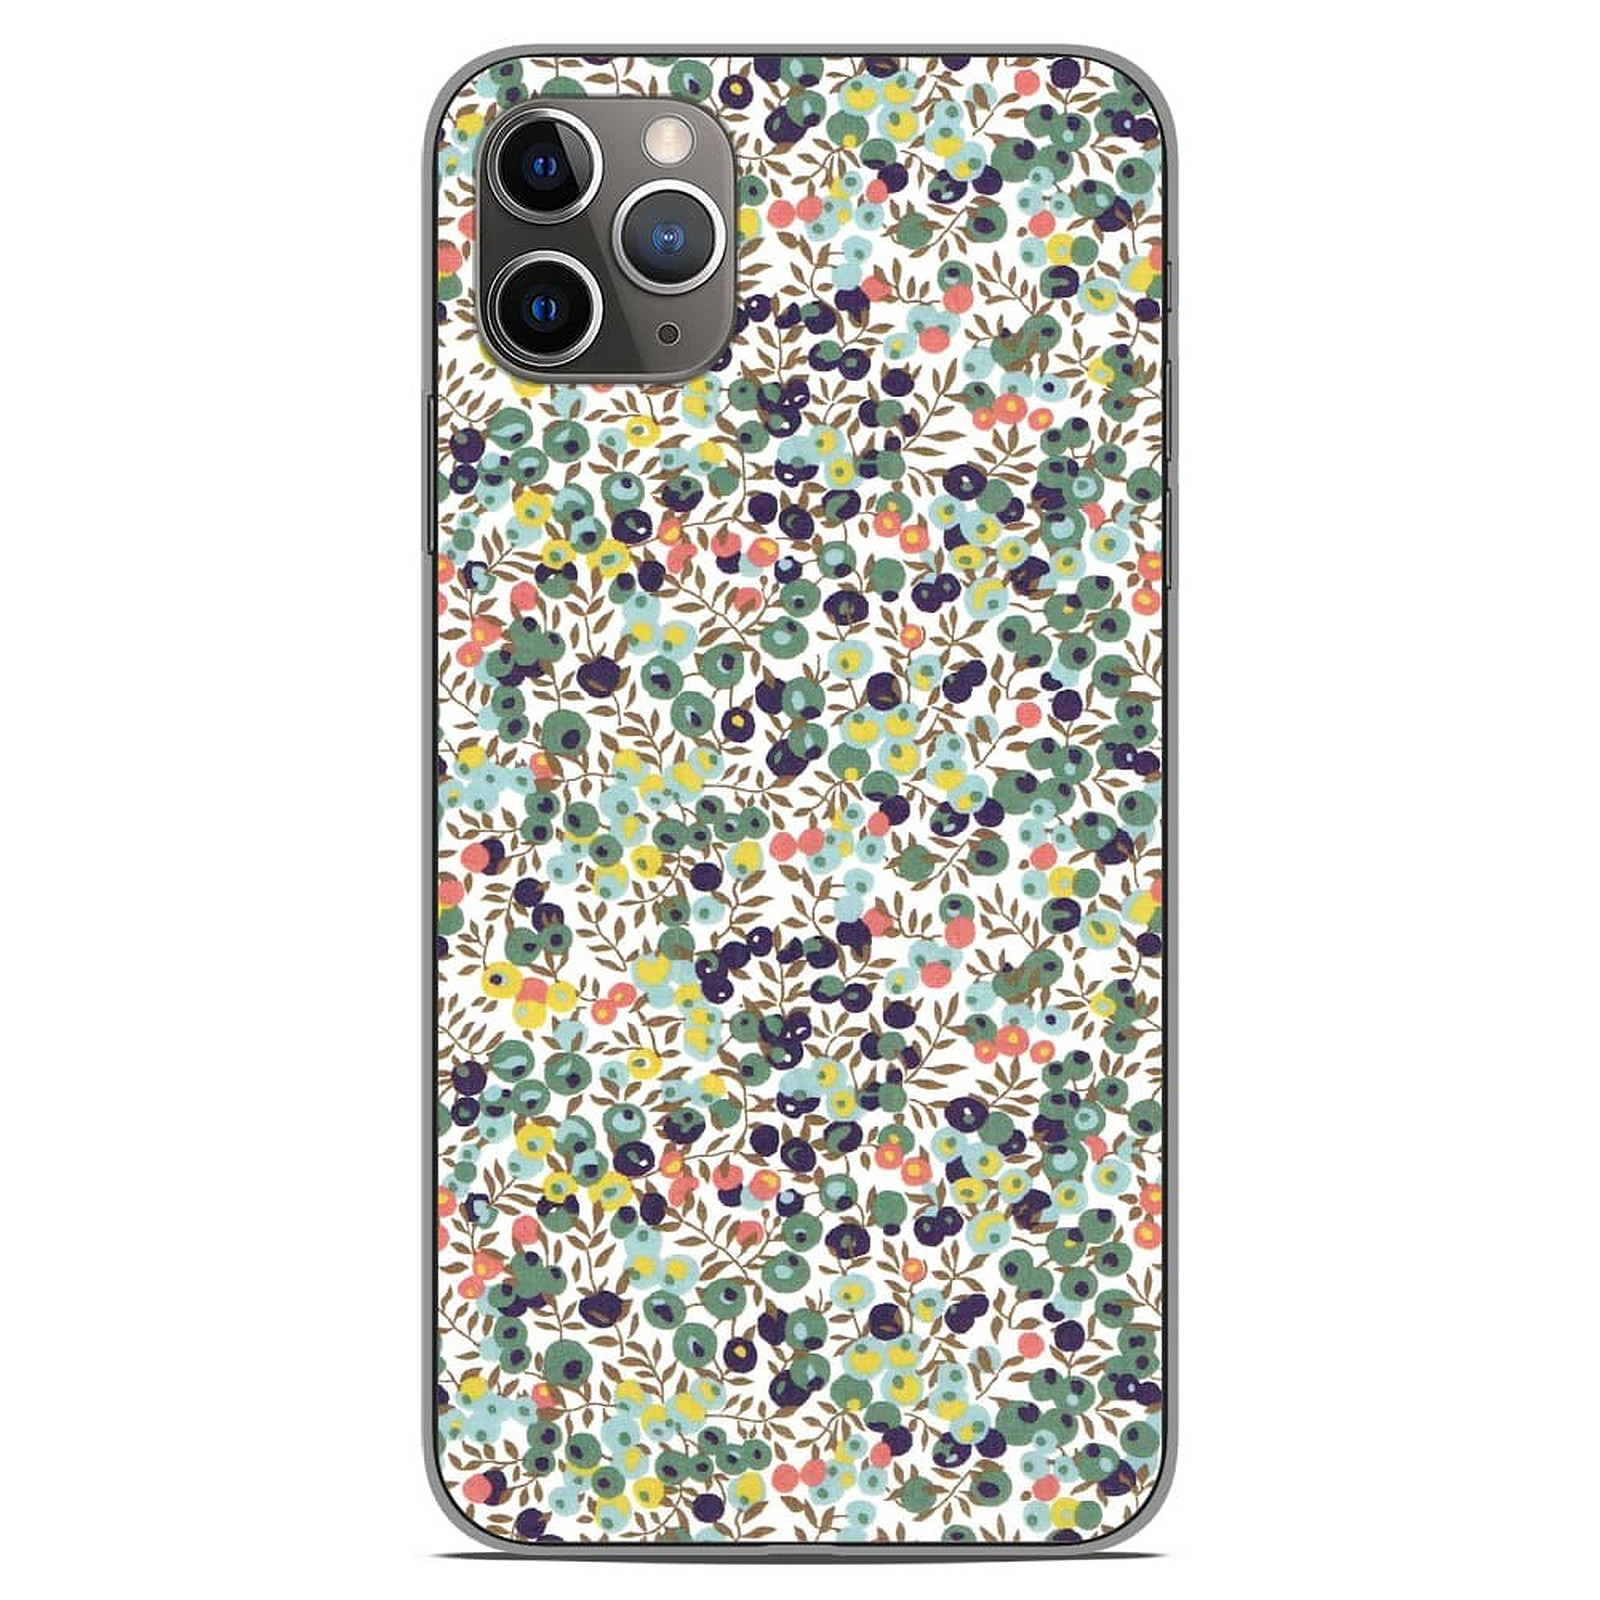 1001 Coques Coque silicone gel Apple iPhone 11 Pro Max motif Liberty Wiltshire Vert - Coque telephone 1001Coques